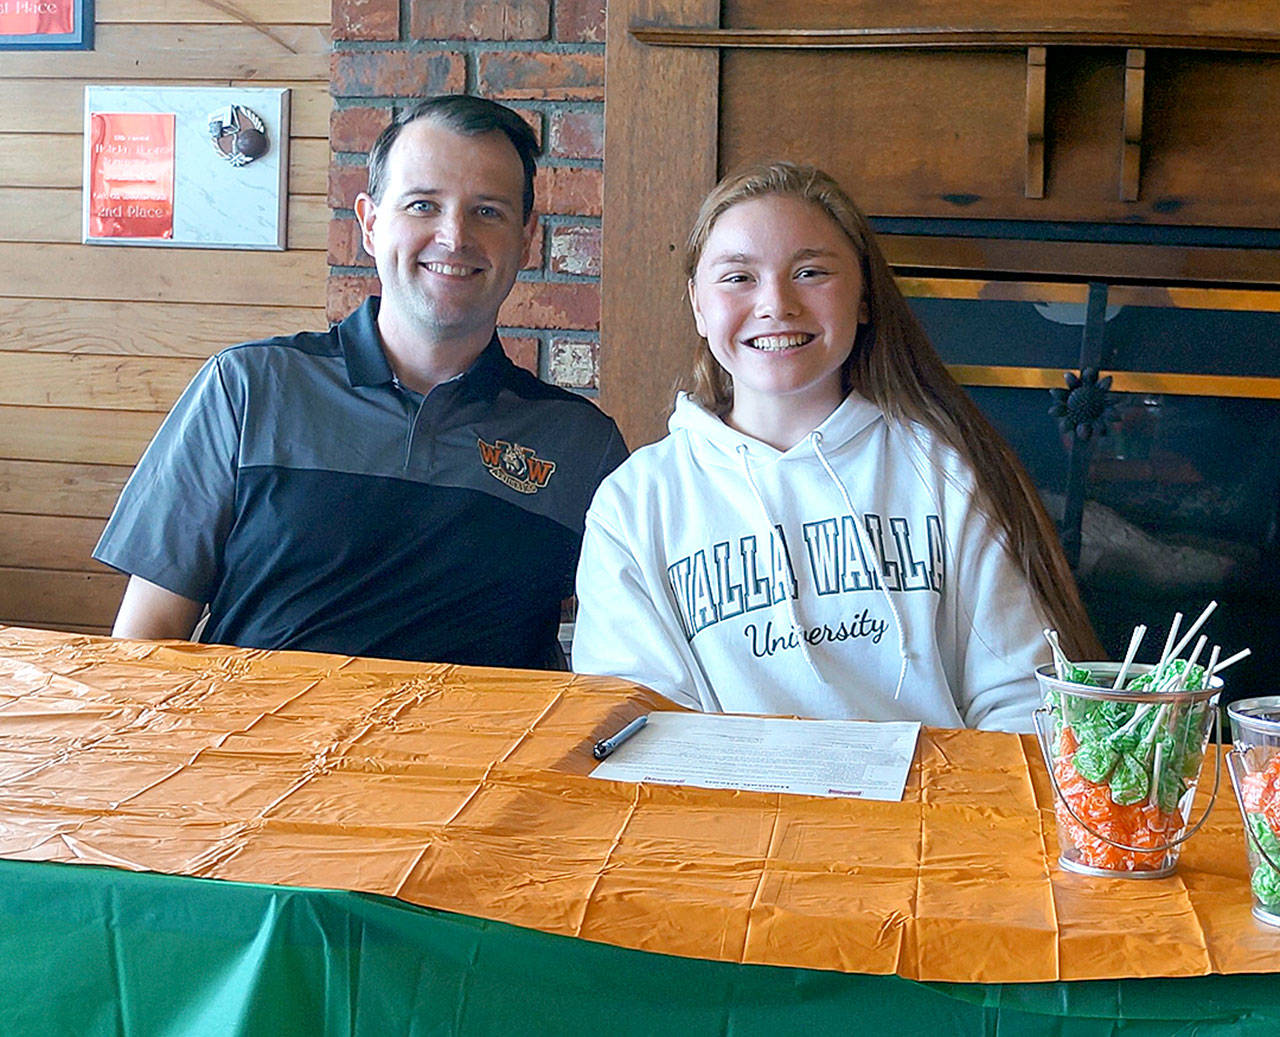 Clallam Bay High School’s Hannah Olson, right, signed on Friday to play basketball for Walla Walla University at the Breakwater Restaurant. With her is her college coach Paul Starkebaum. Olson, a Neah Bay resident and a member of the Makah Tribe, played basketball and volleyball for Clallam Bay and is wrapping up her final track season at the school.